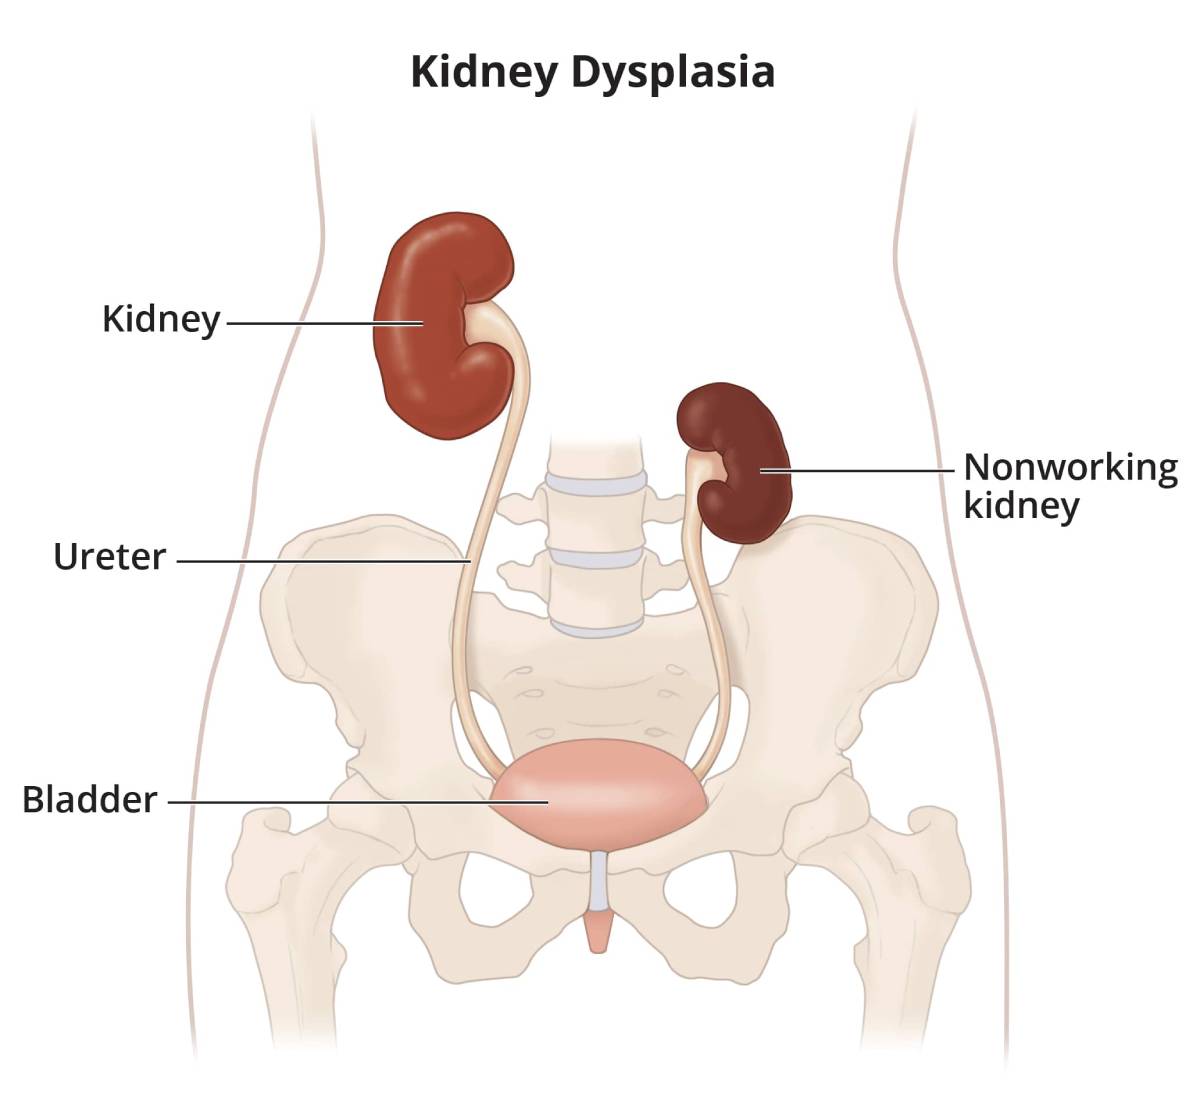 The illustration shows a healthy kidney, a nonworking kidney, two ureters, and the bladder.